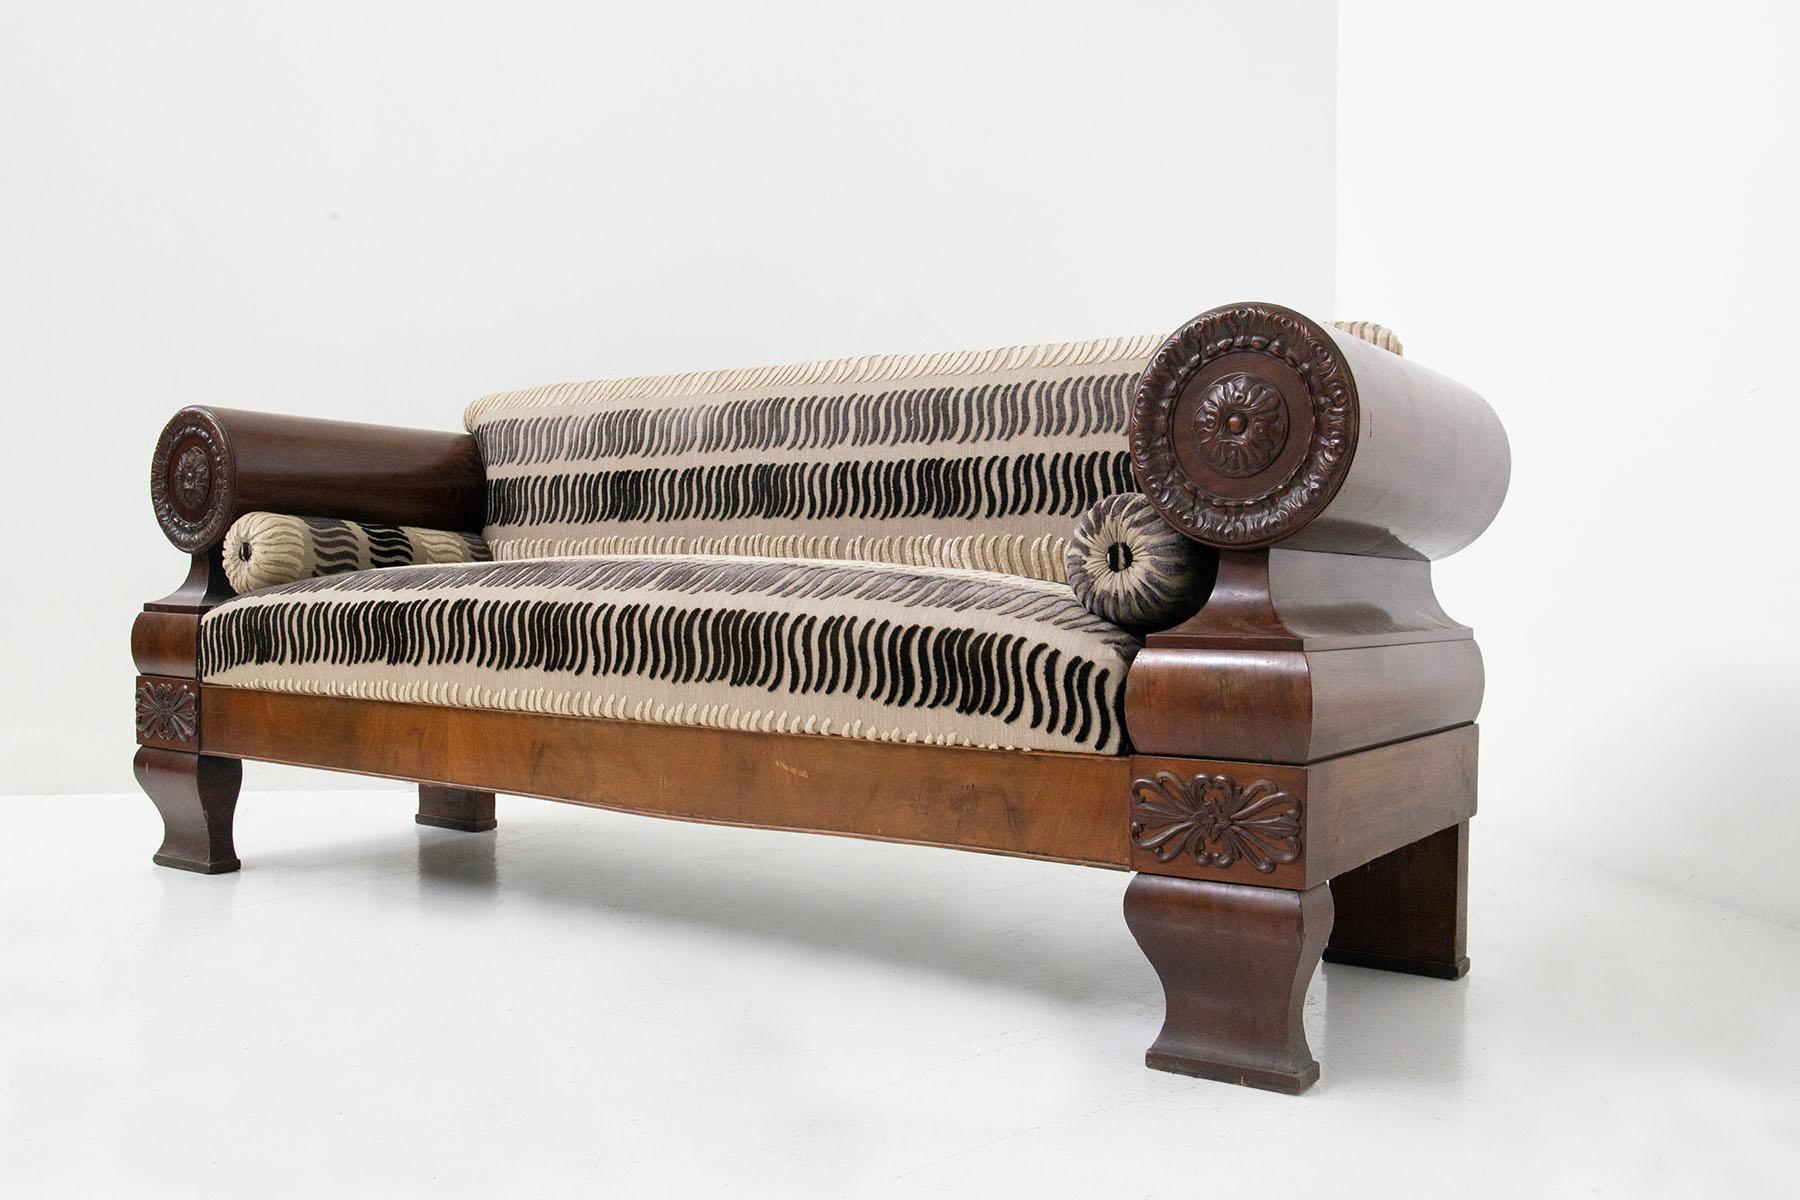 Neoclassical Antique Biedermeier Sofa Made of Velvet Fabric and Carved Wood For Sale